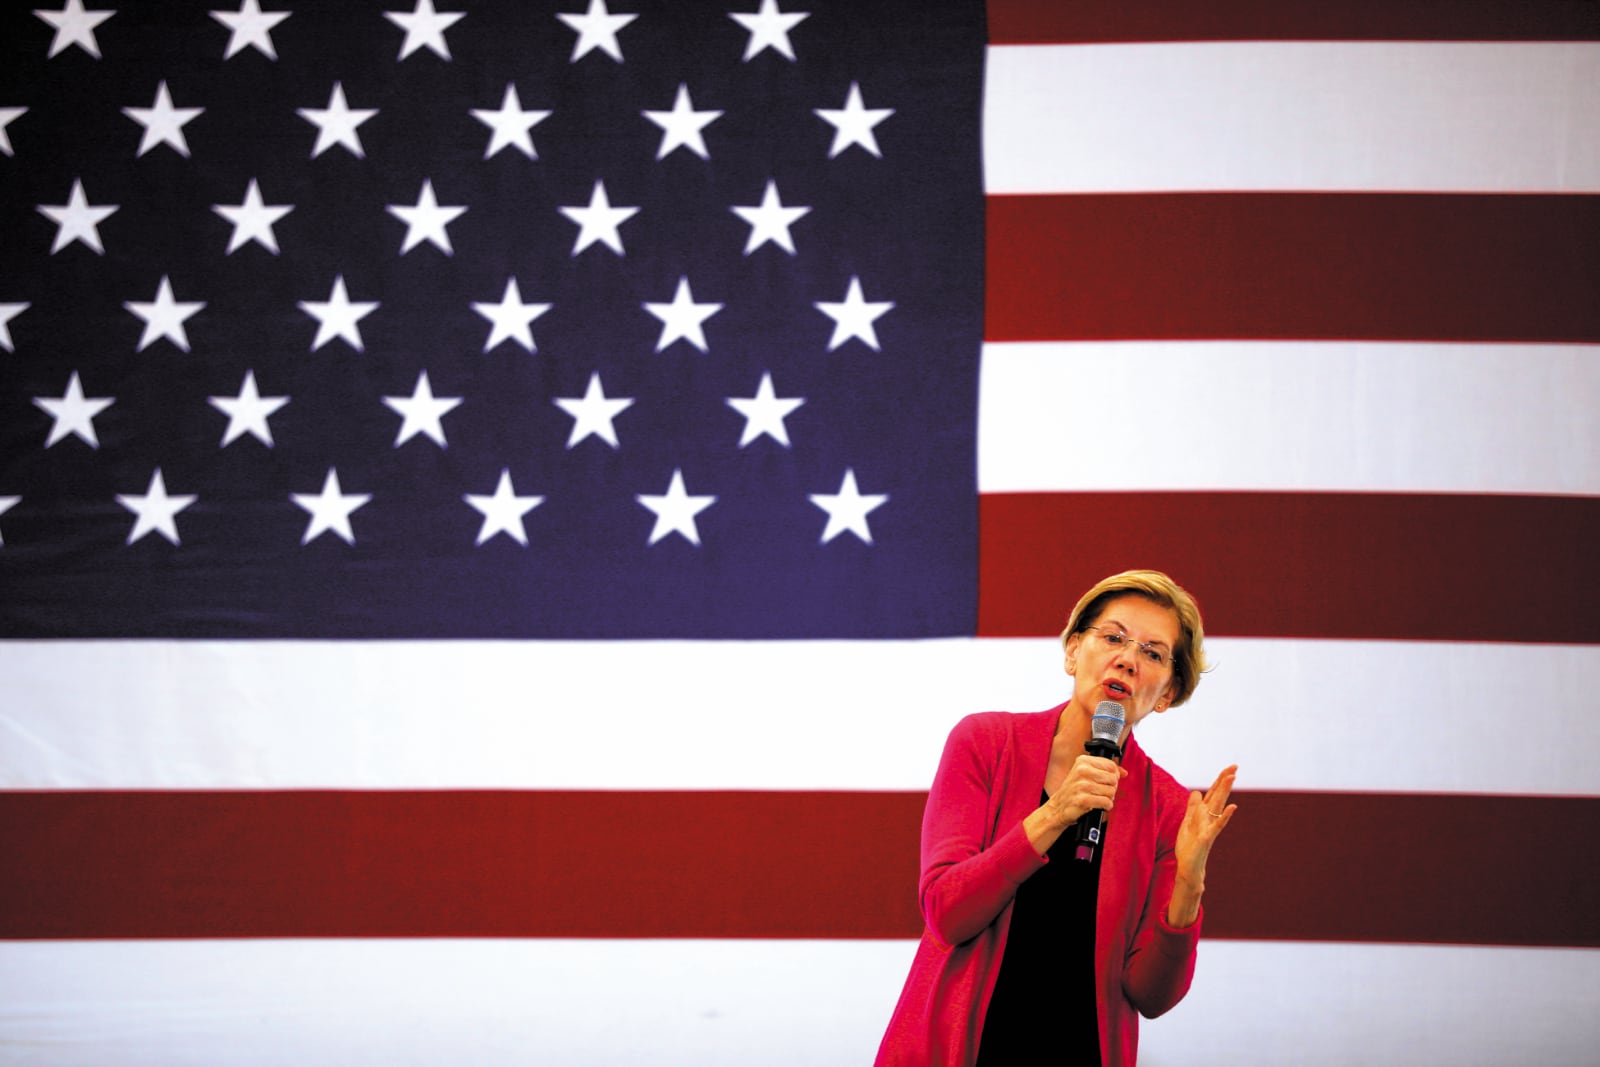 Elizabeth Warren speaking at a campaign event at the University of New Hampshire, Durham, October 2019
